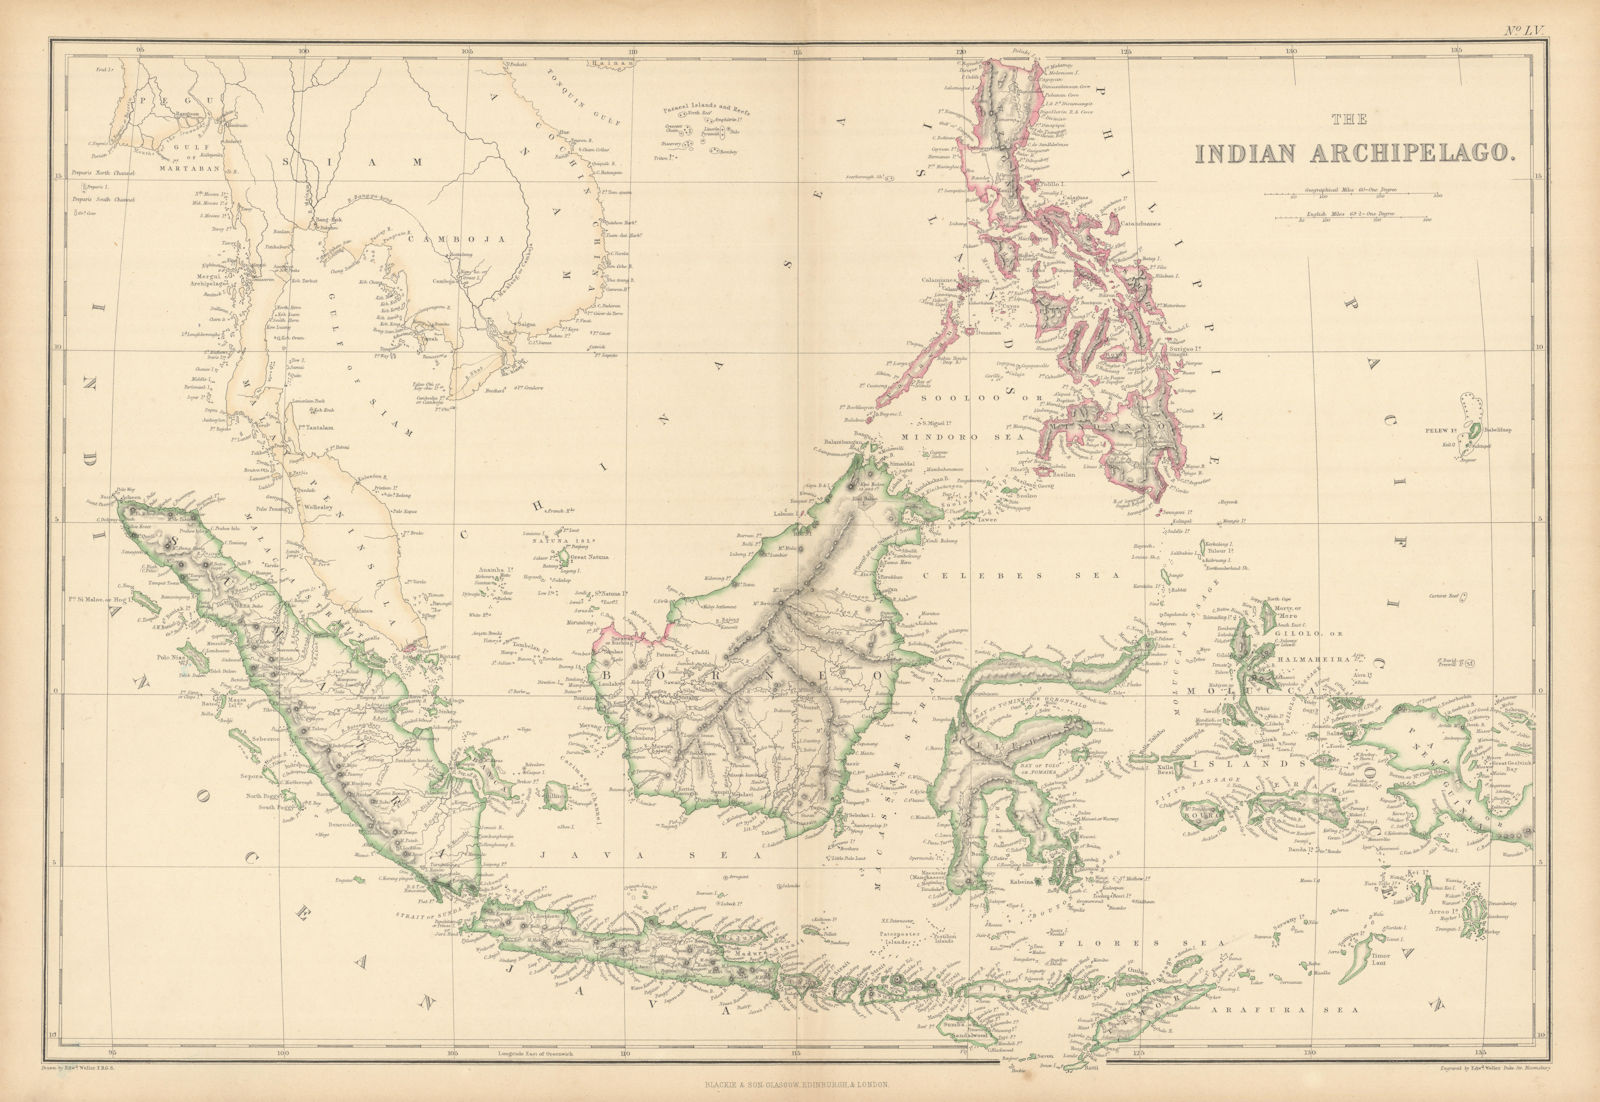 Associate Product The Indian Archipelago. East Indies Indonesia Philippines. WELLER 1859 old map